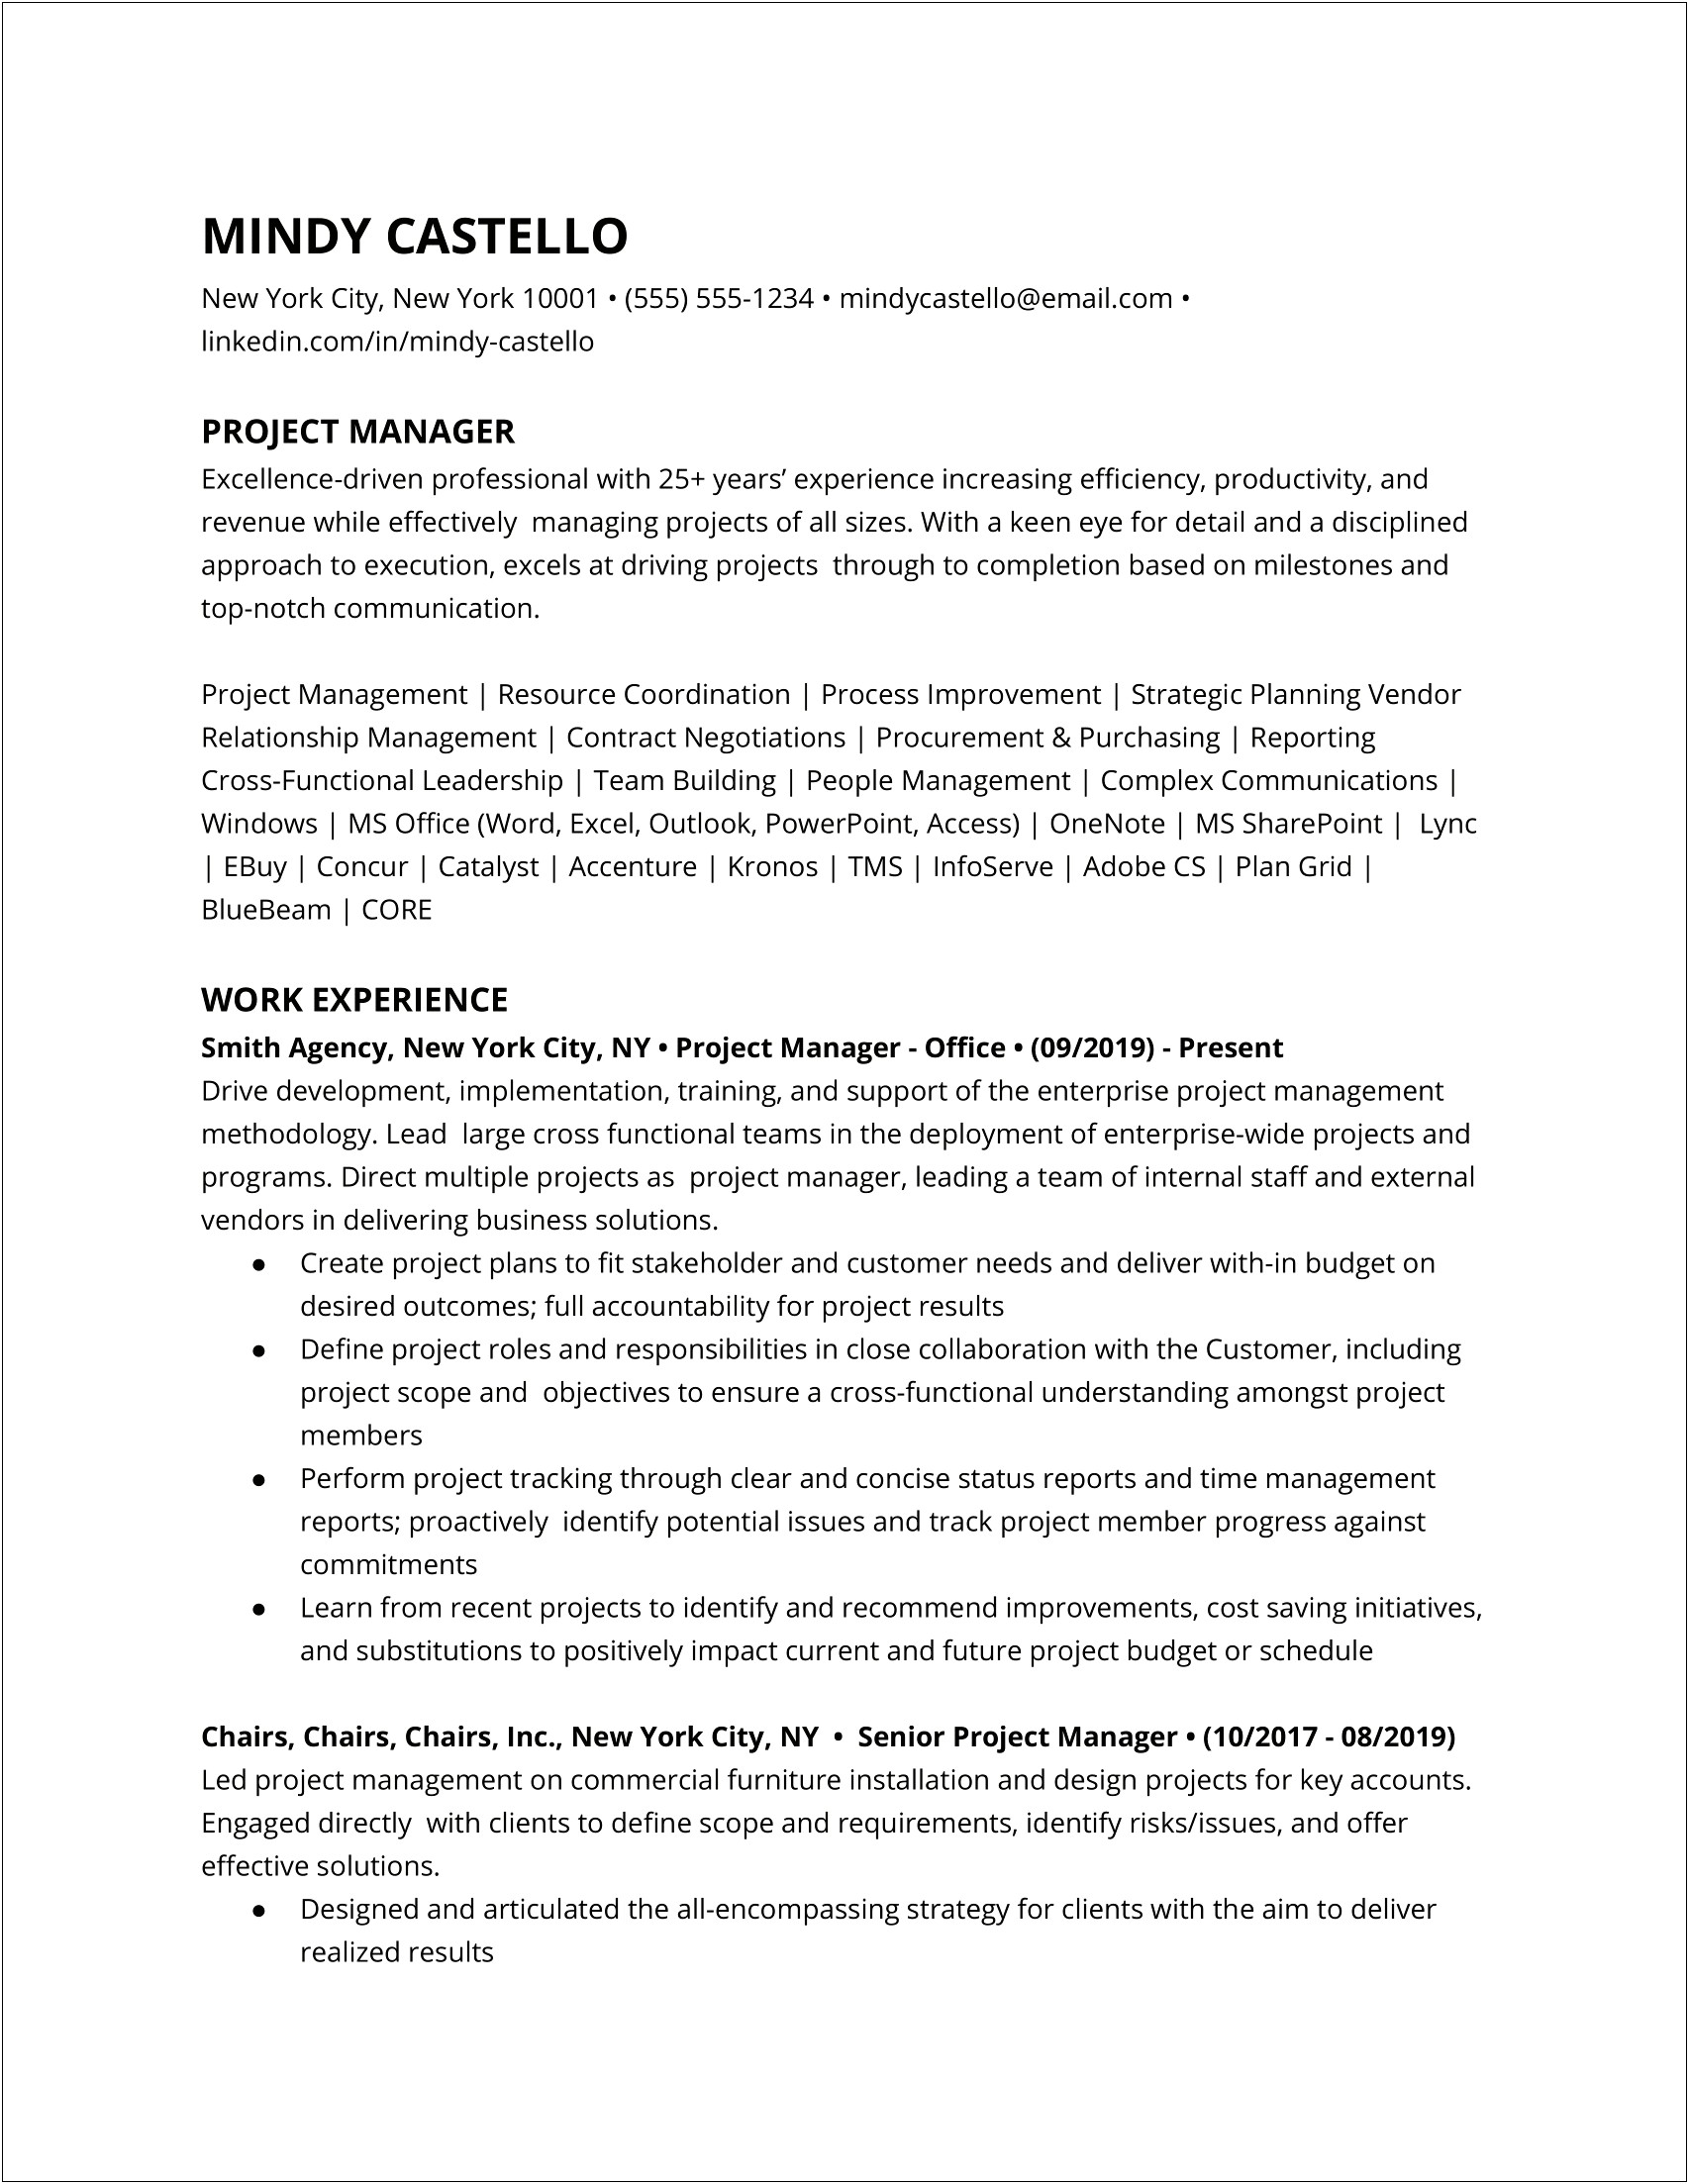 Resume Objective Statements For Project Management